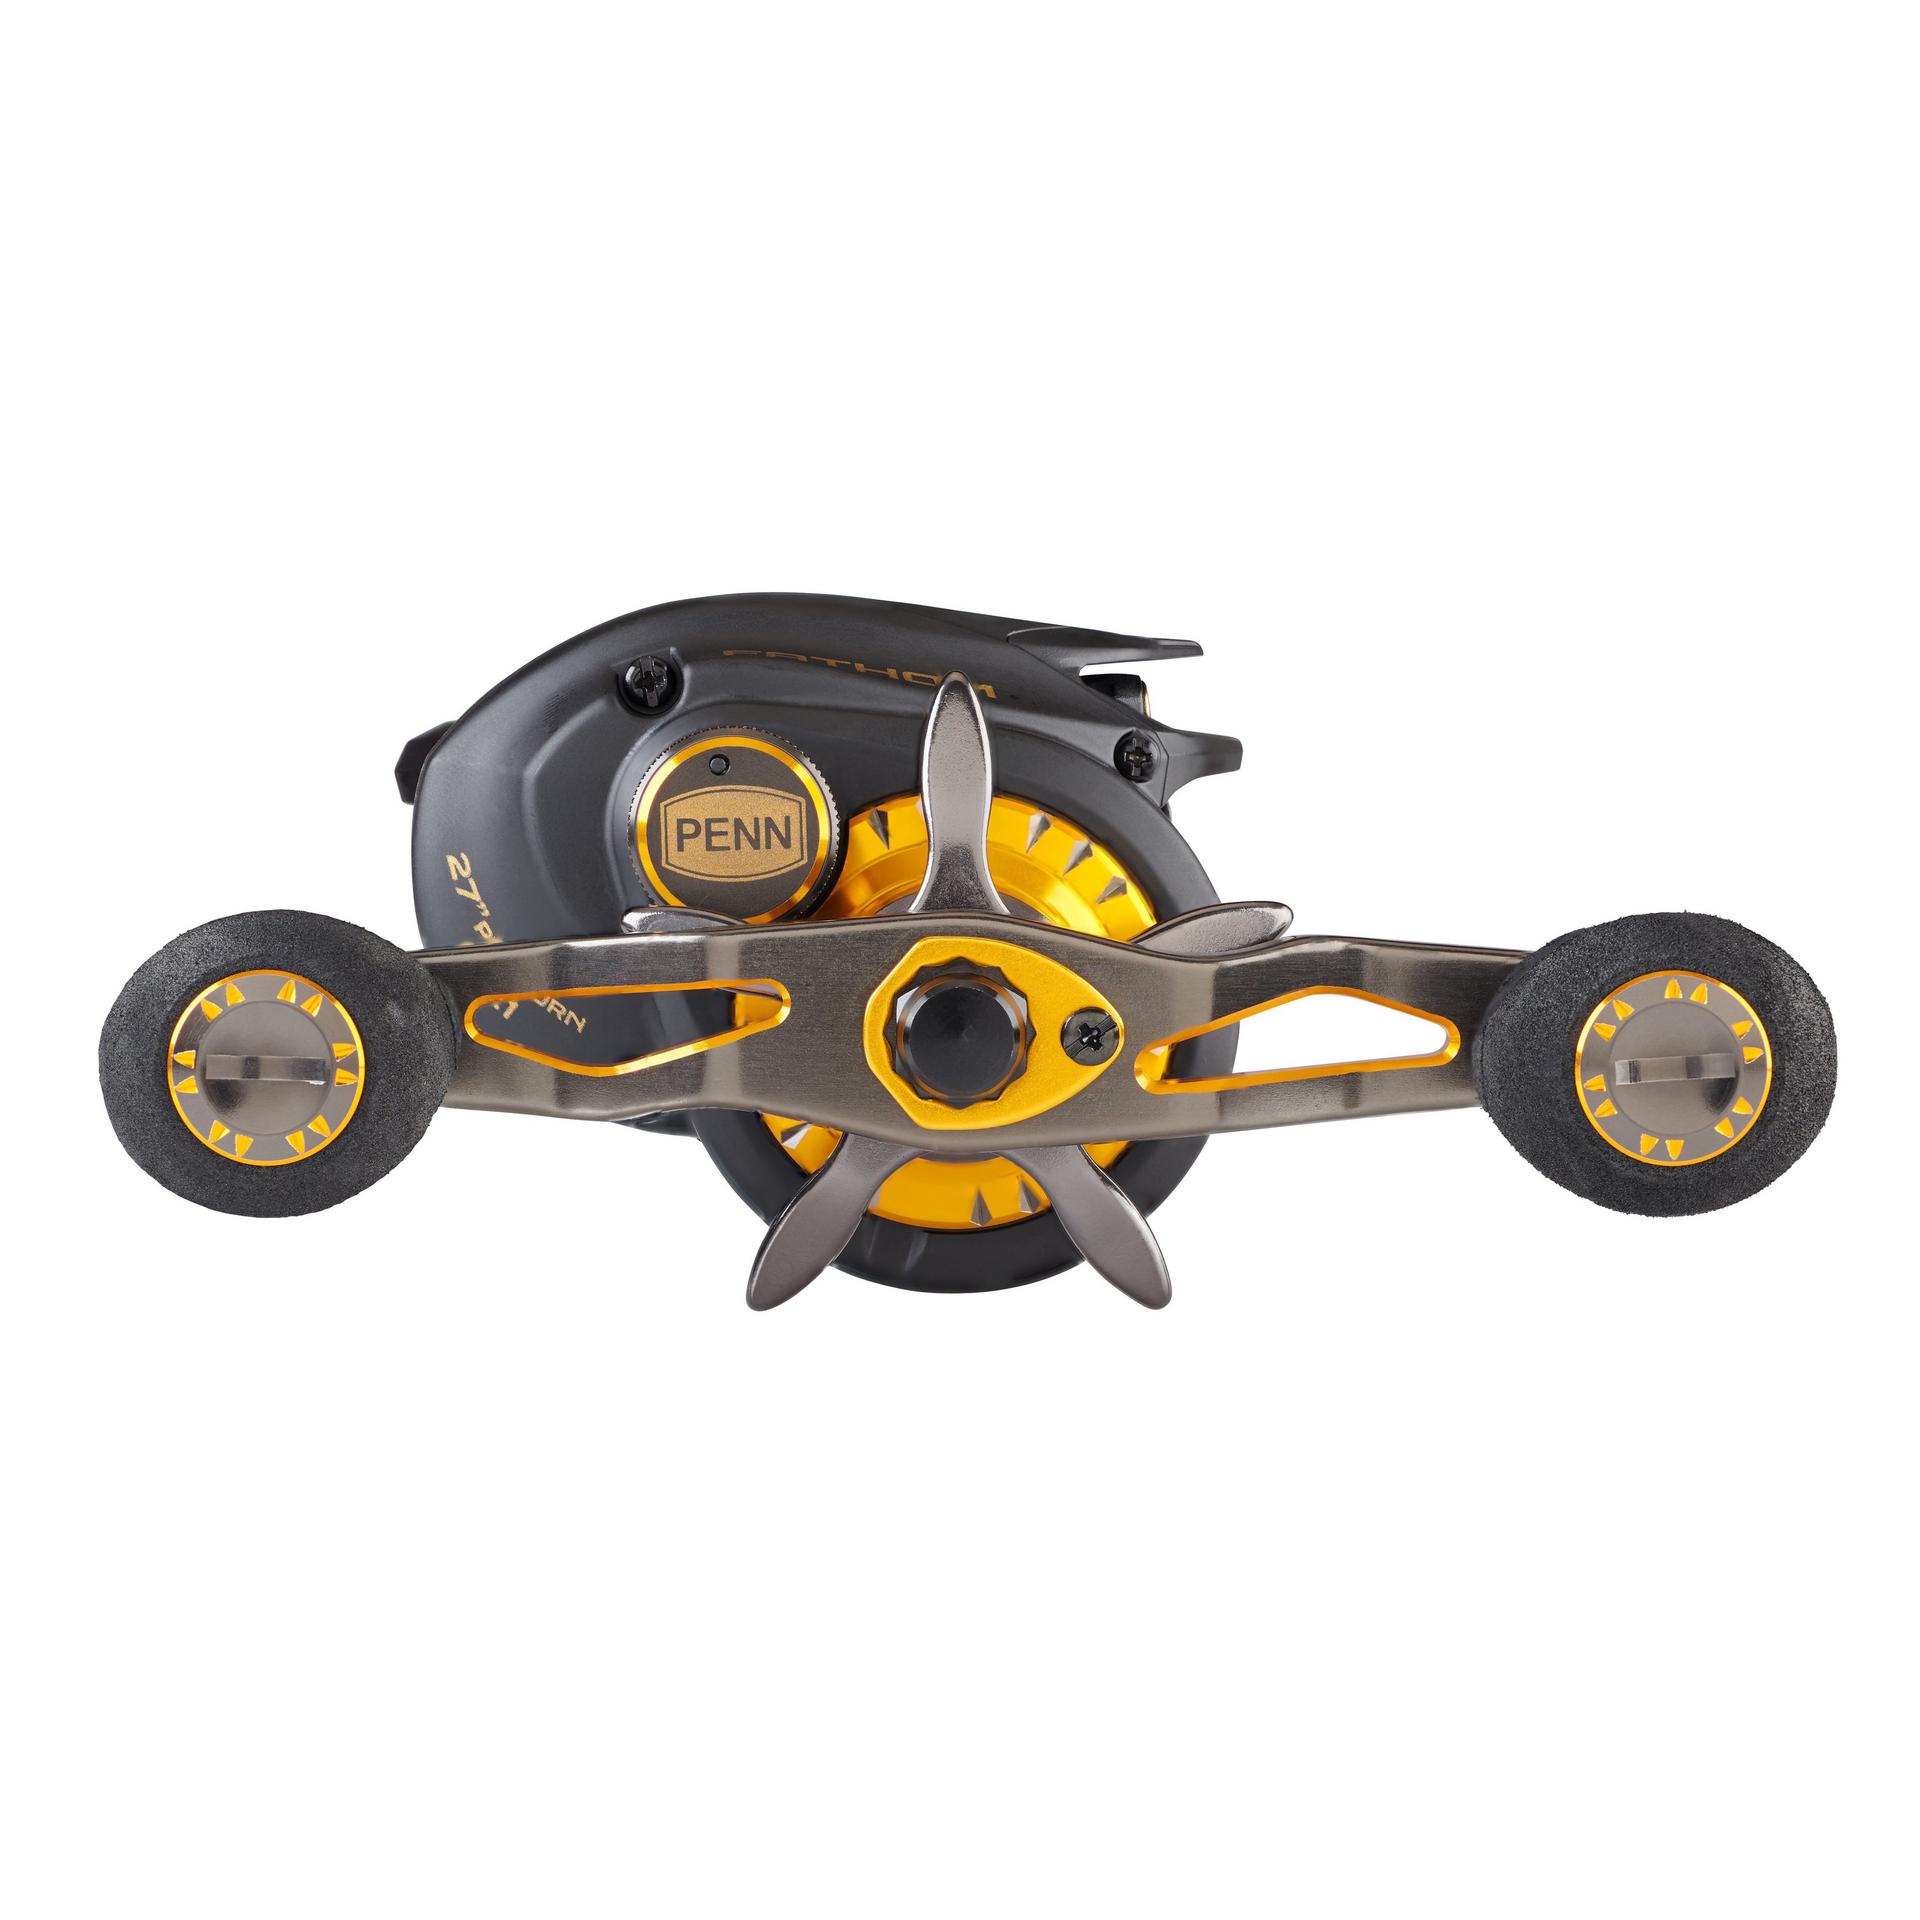 bait casting reel, bait casting reel Suppliers and Manufacturers at